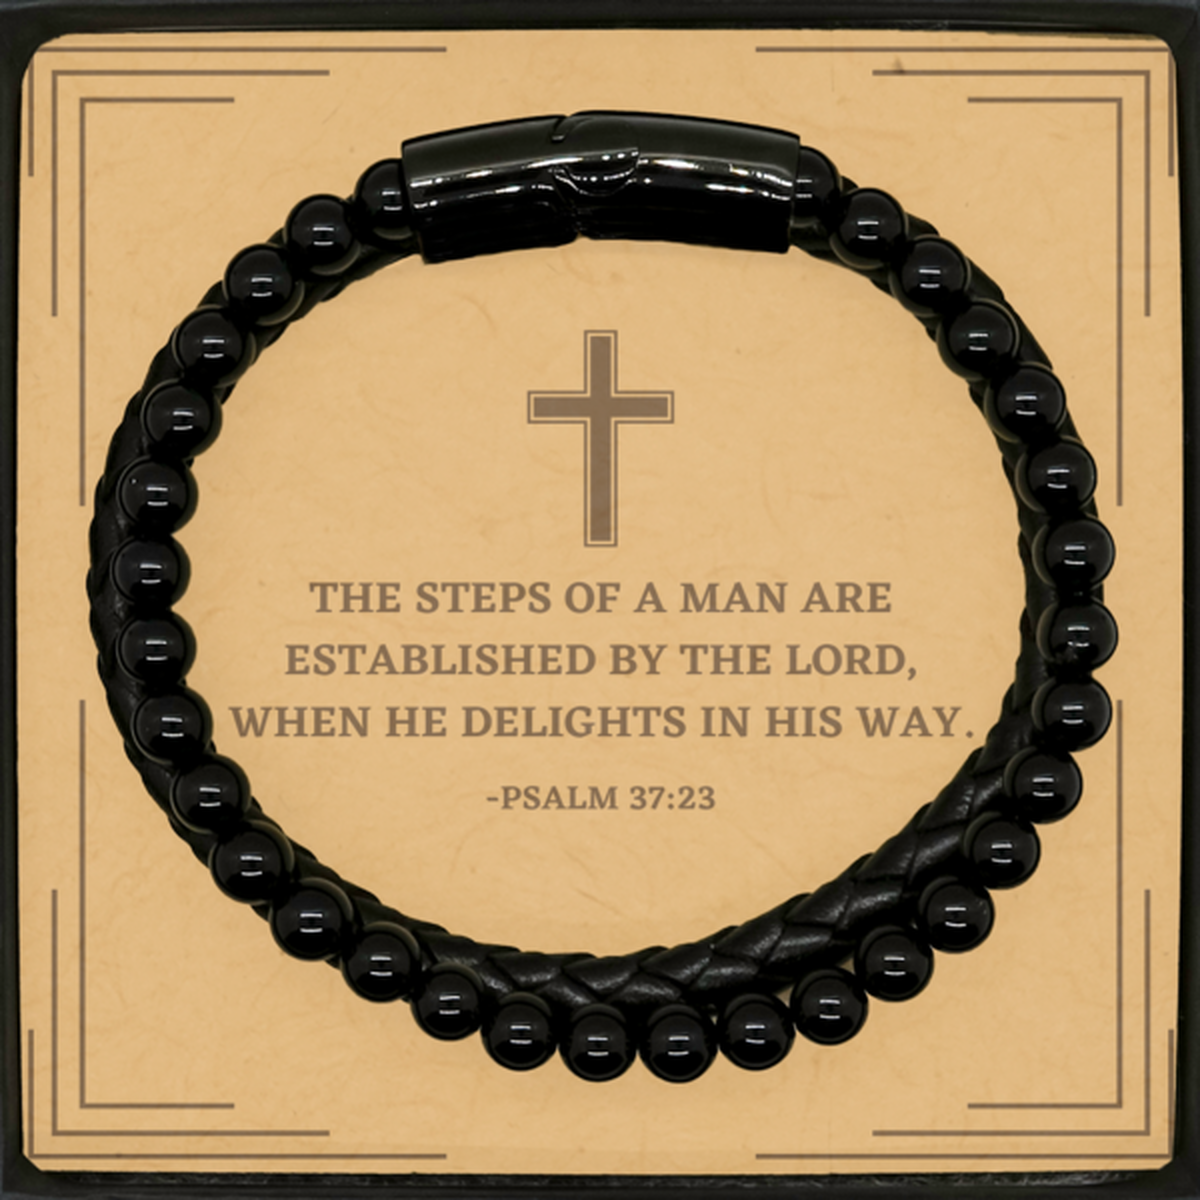 Baptism Gifts For Teenage Boys Girls, Christian Bible Verse Stone Leather Bracelet, The steps of a man are, Confirmation Gifts, Bible Verse Card for Son, Godson, Grandson